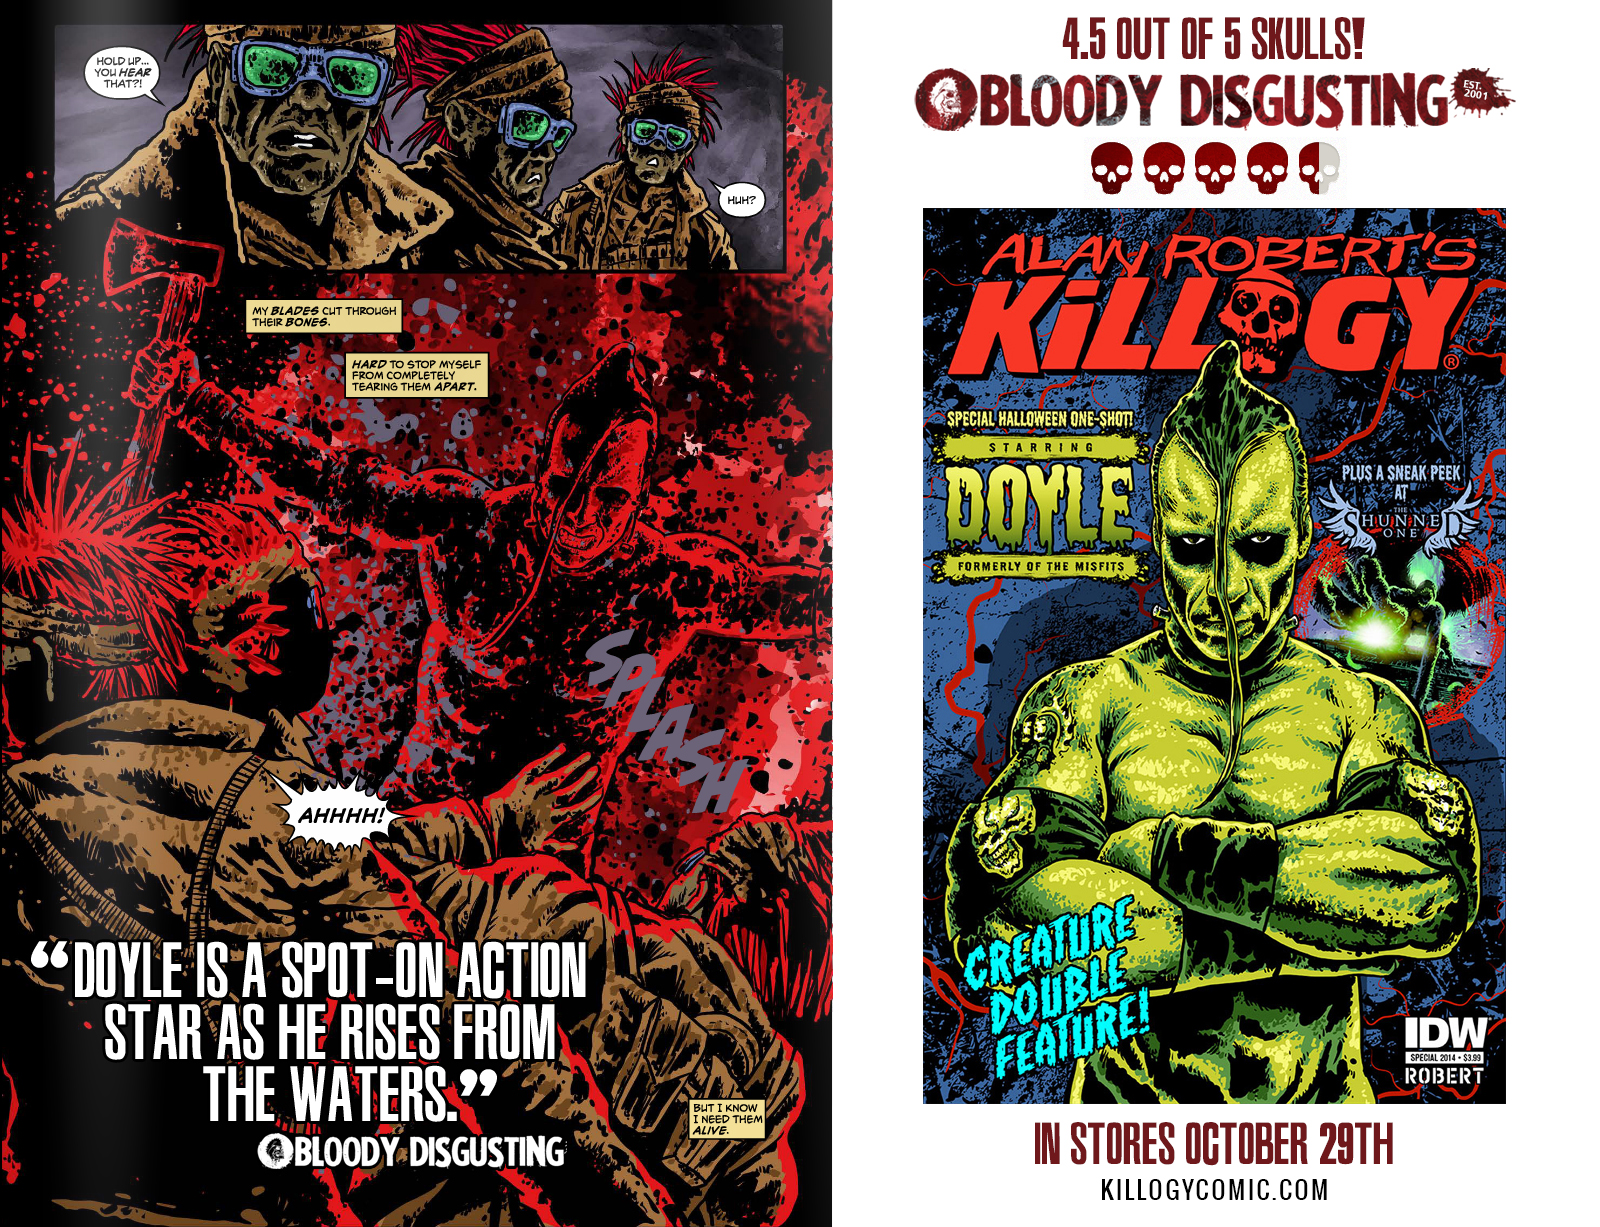 Killogy Halloween Special Gets 4.5 out of 5 Skulls on Bloody Disgusting!